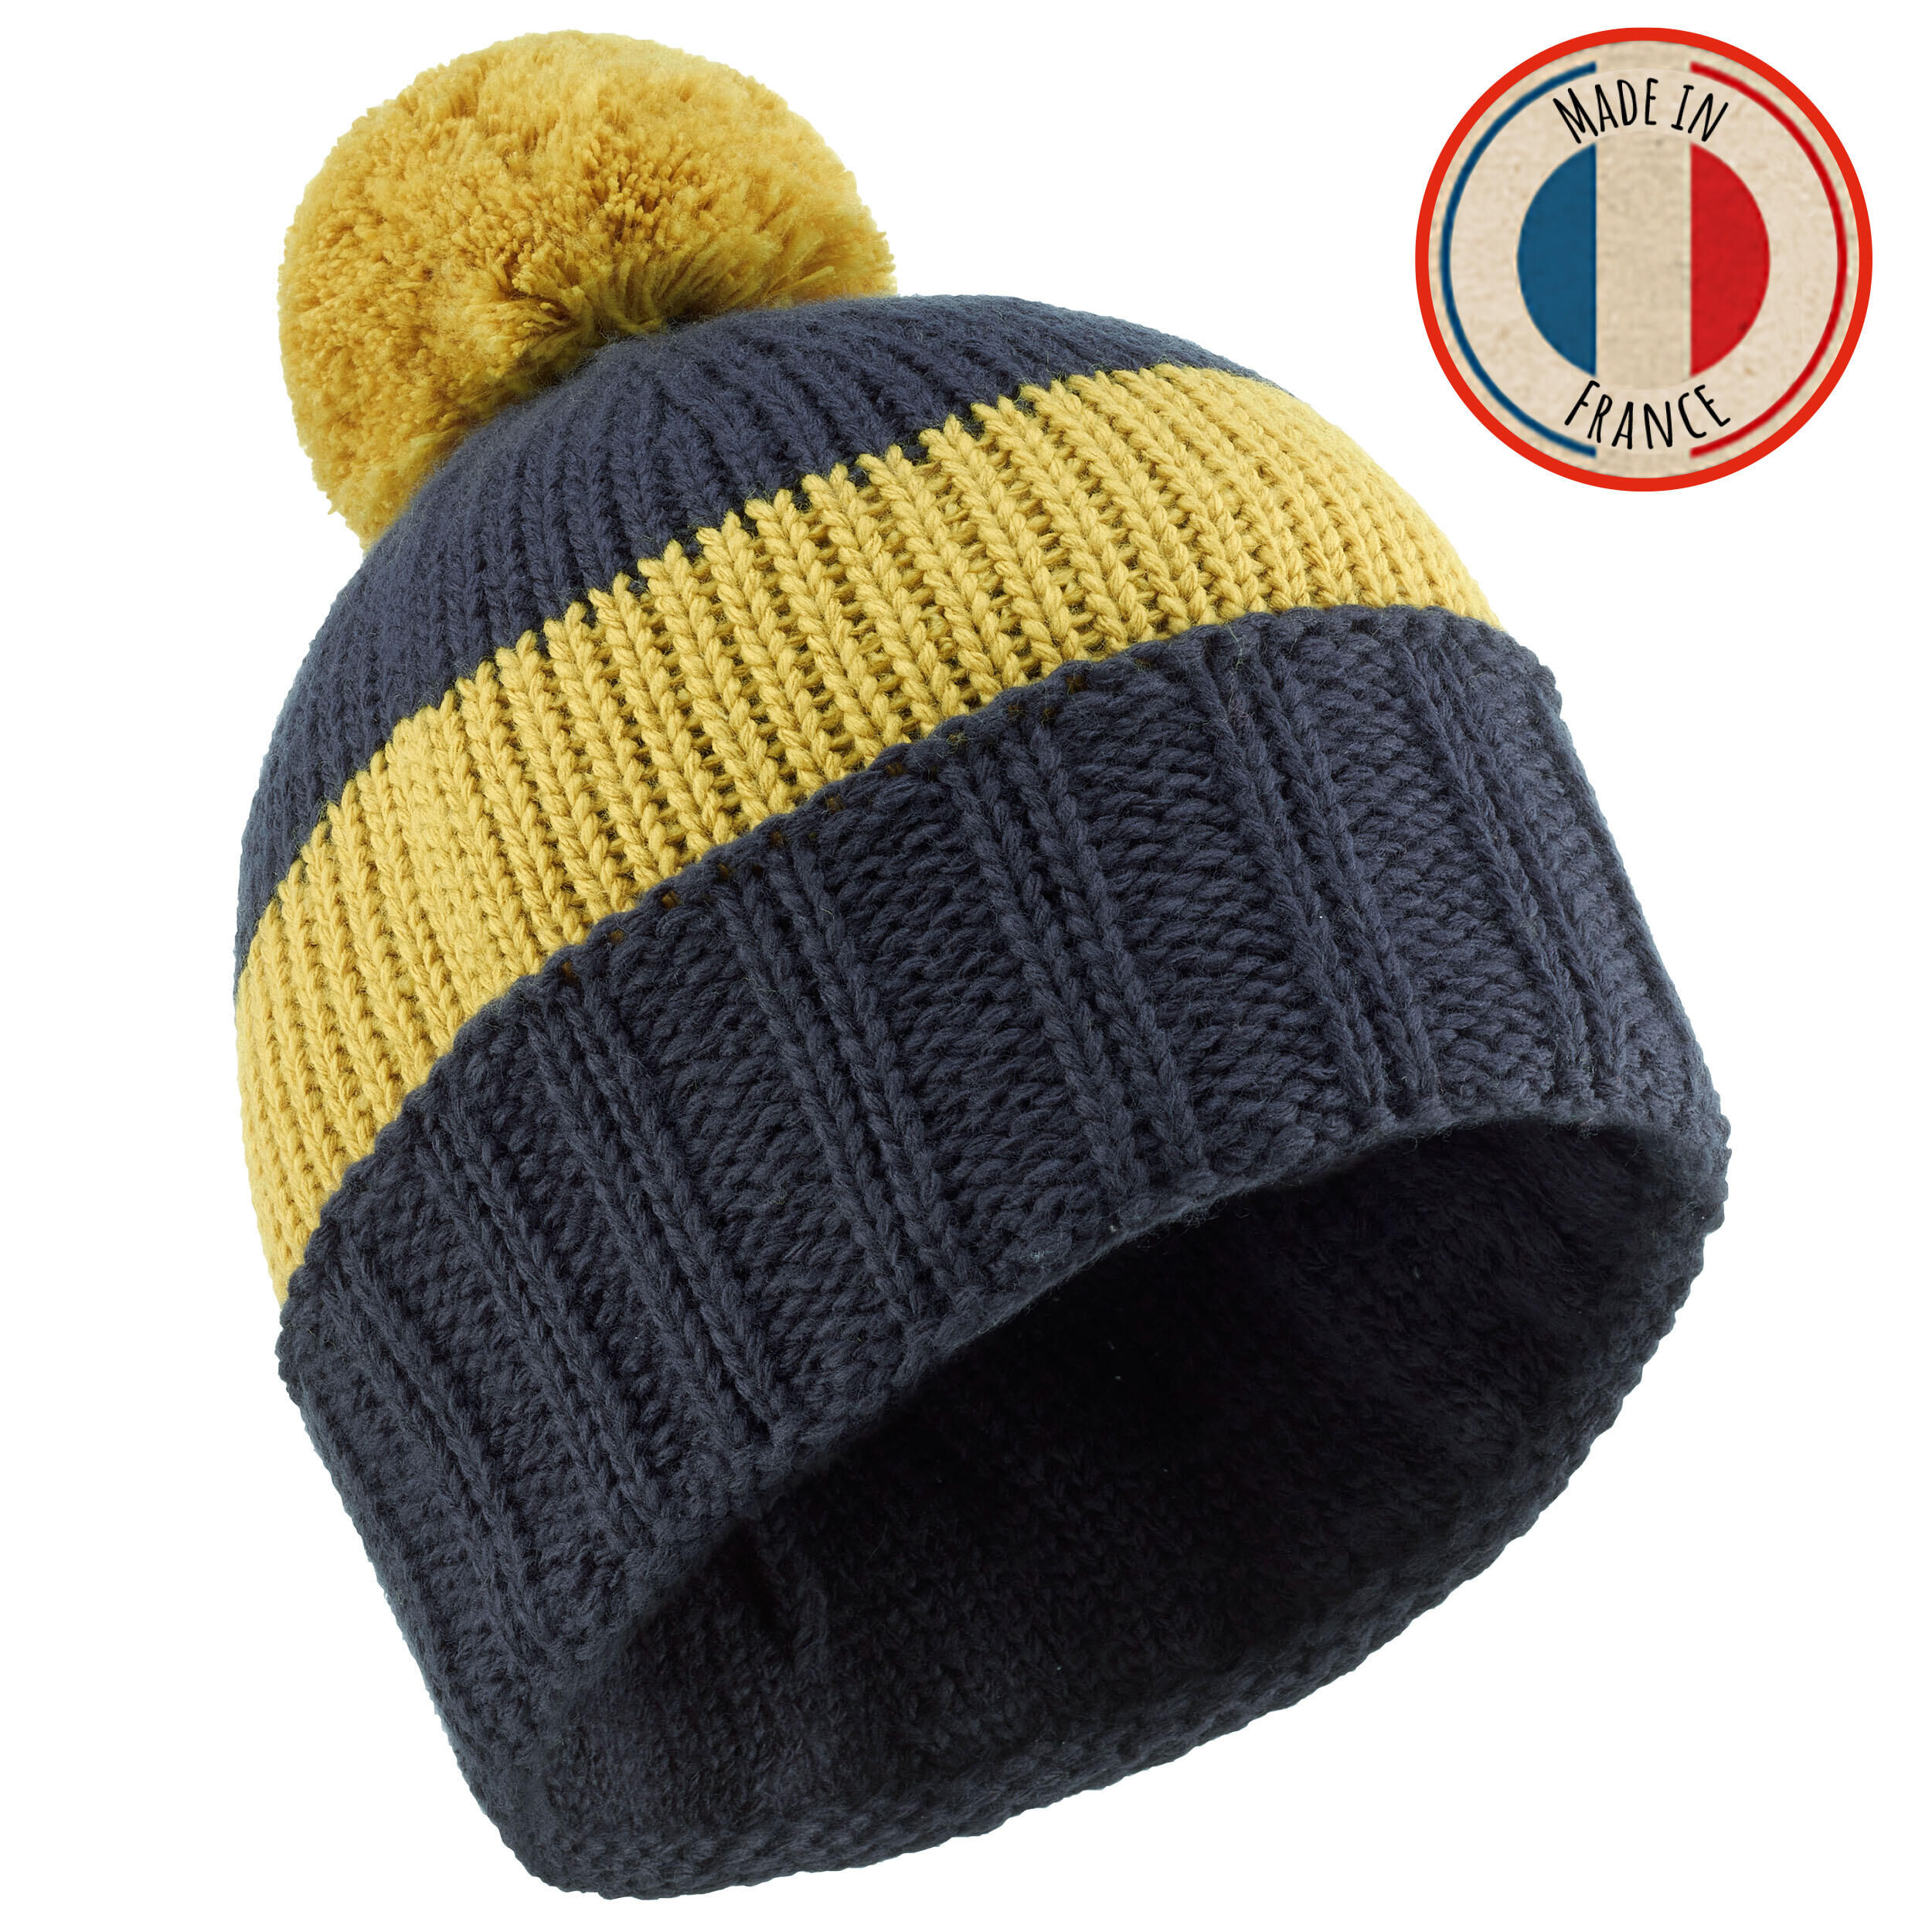 WEDZE ADULT SKI HAT GRAND NORD MADE IN FRANCE NAVY BLUE-OCHRE